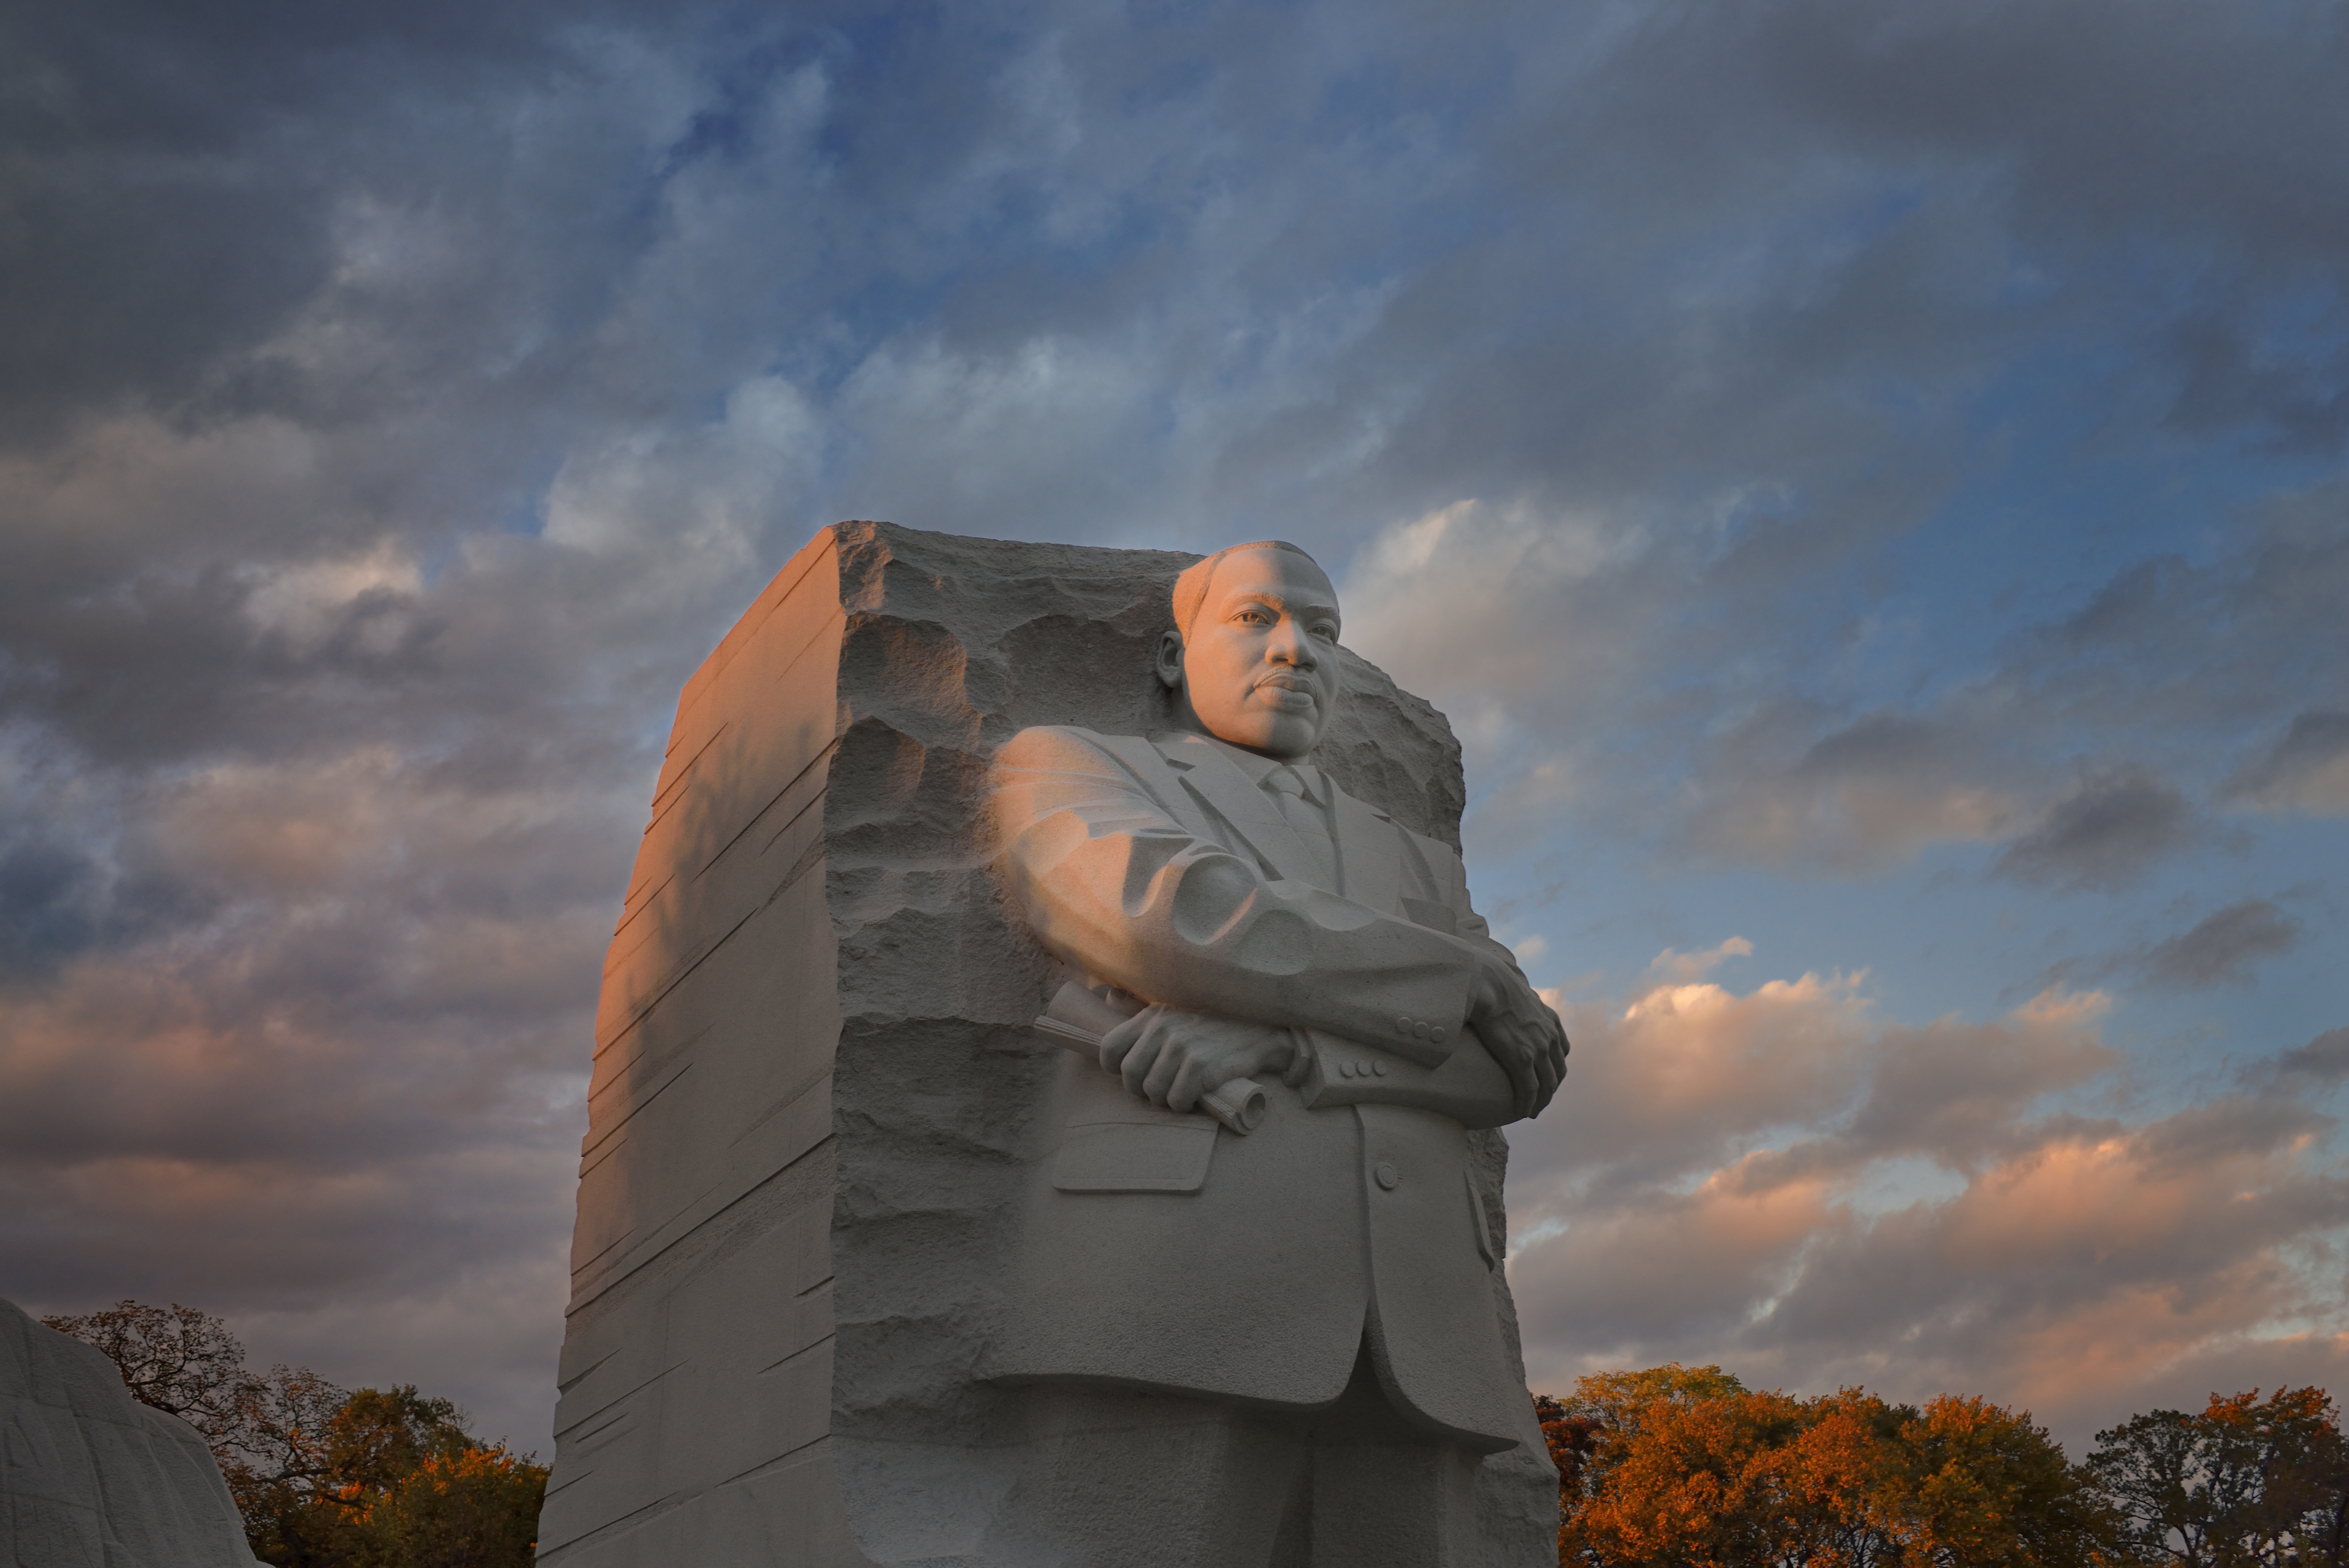 Image of Martin Luther King's memorial in Washington, DC